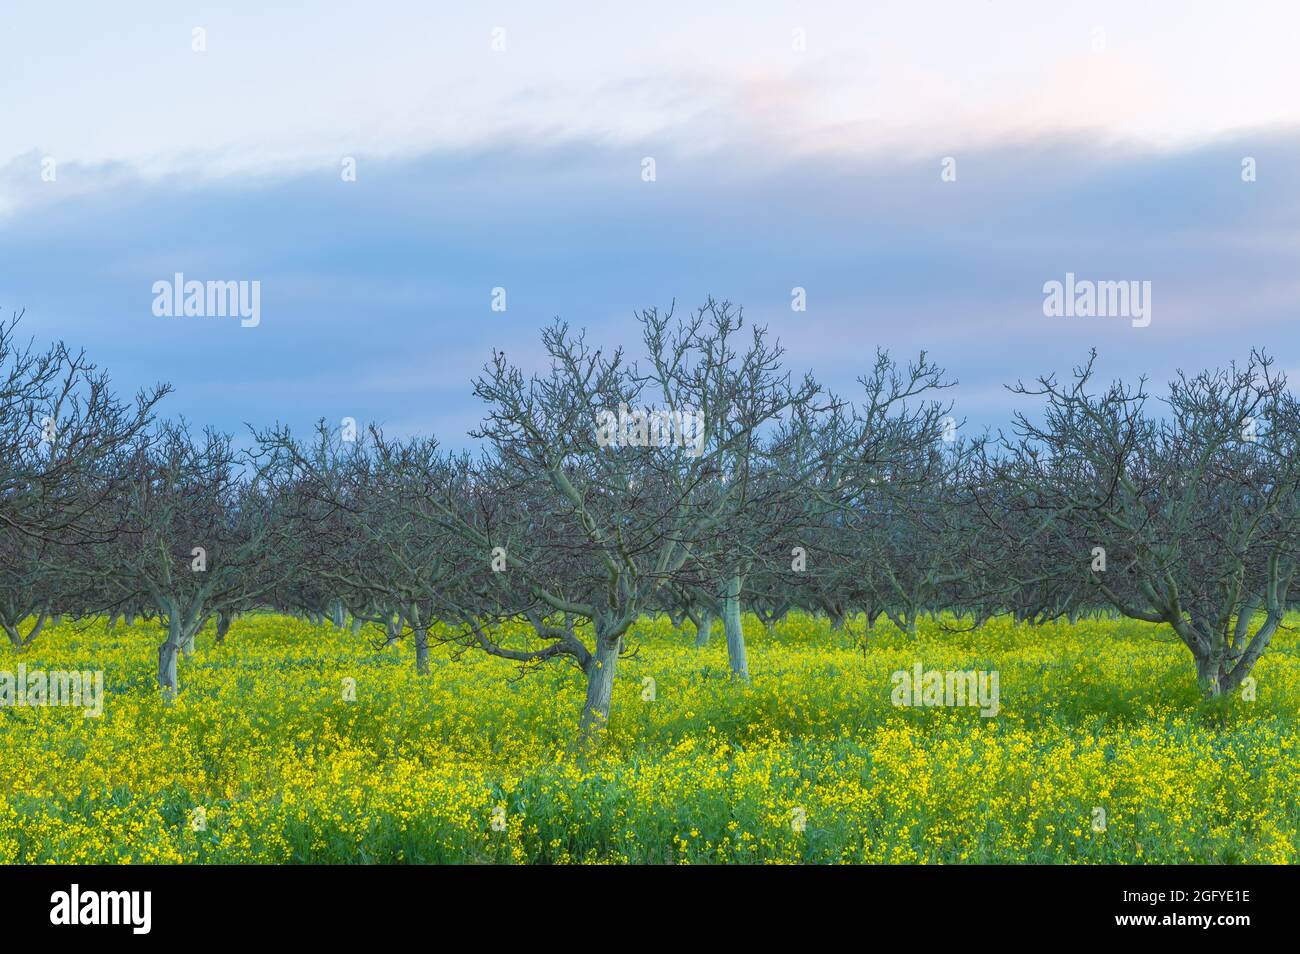 Blooming field mustard at the walnut farm in Gilroy, California, United States, in early spring morning. Stock Photo